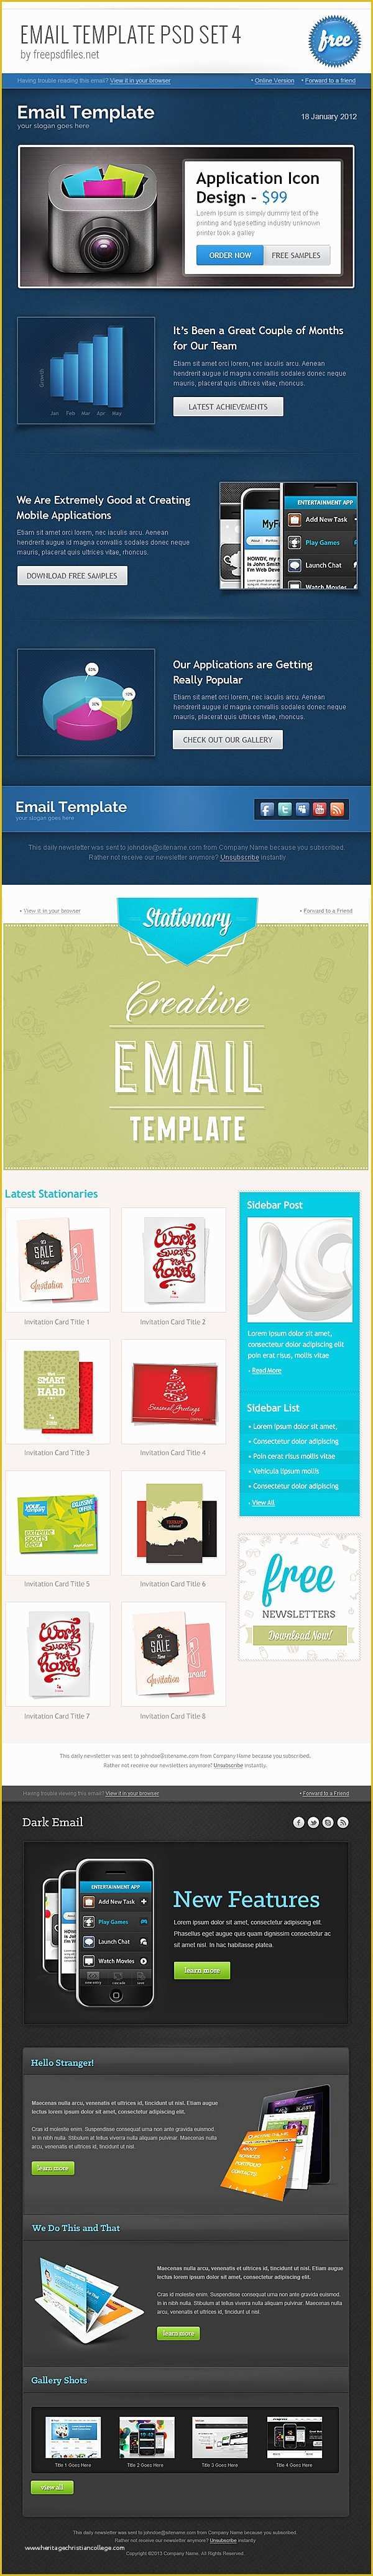 Free Marketo Email Templates Of Free Email Newsletter Templates Psd Css Author